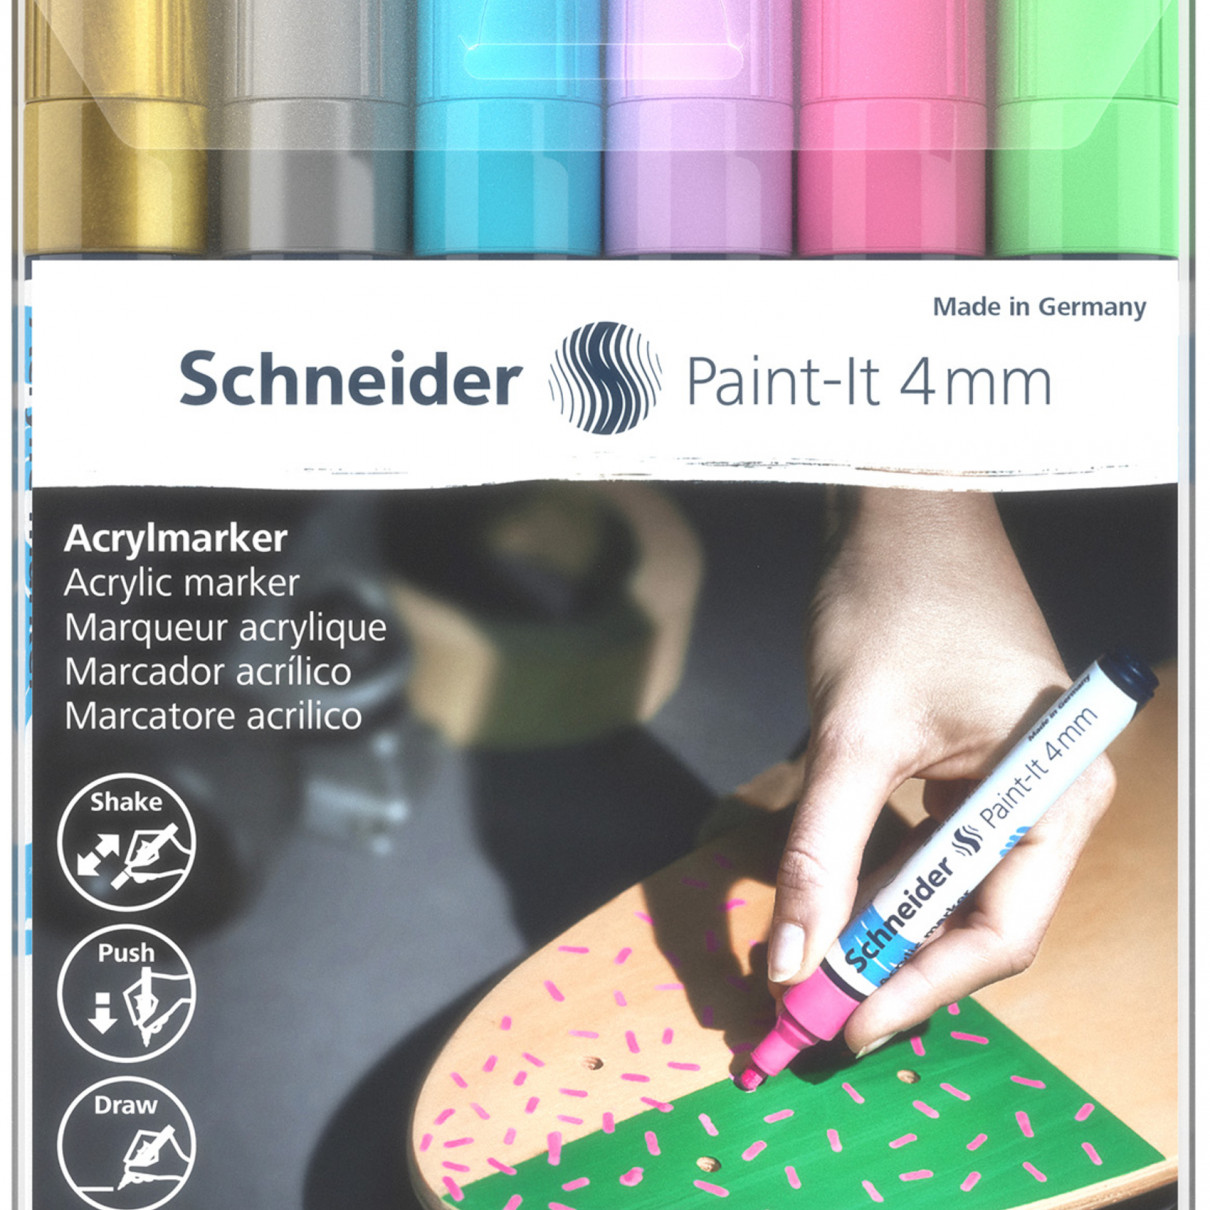 Schneider Paint-It 320 Acrylic Markers - 4mm - Set 2 (Pack of 6)